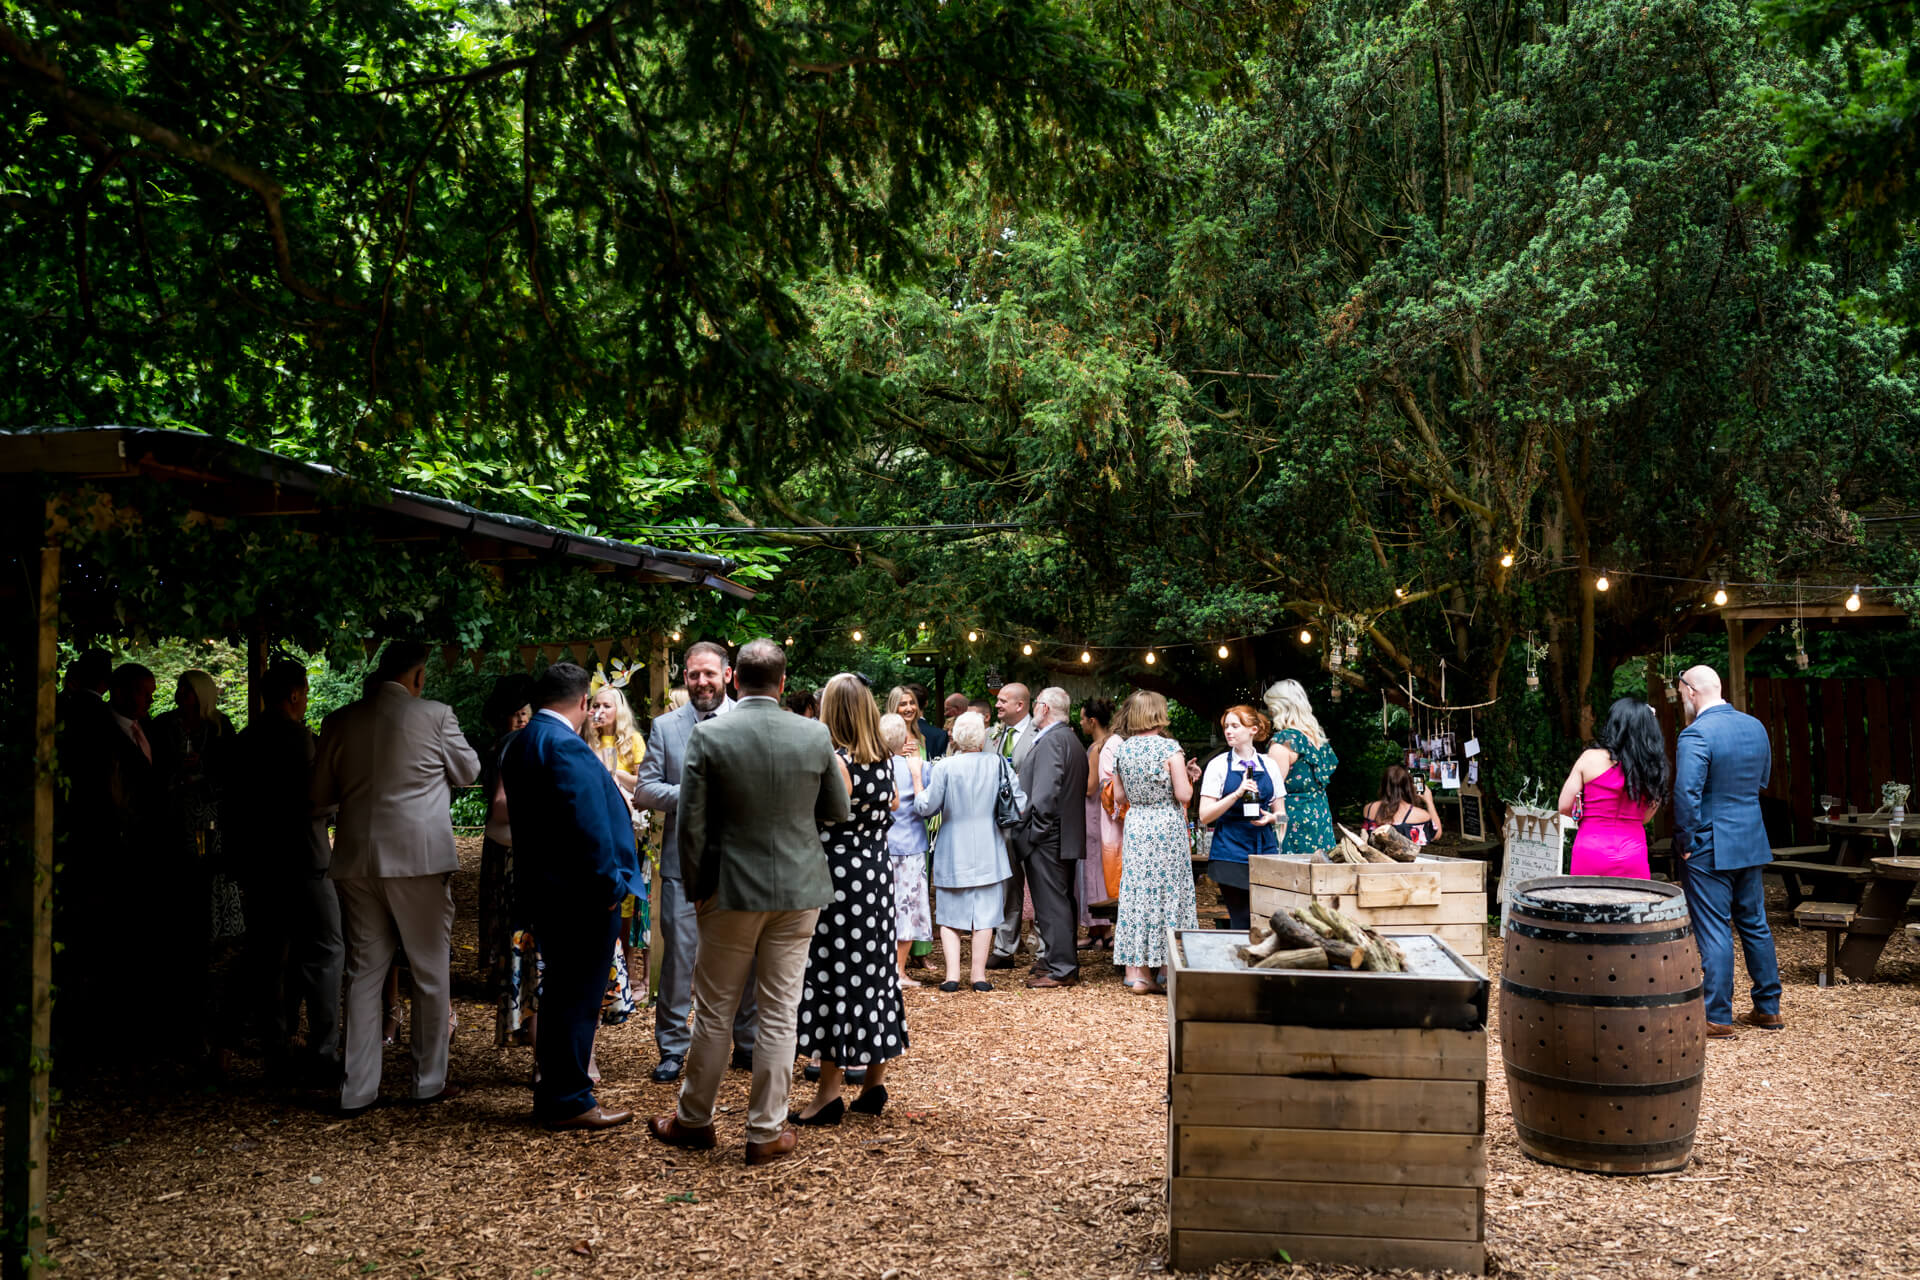 Outdoor woodland wedding with string lights and guests.